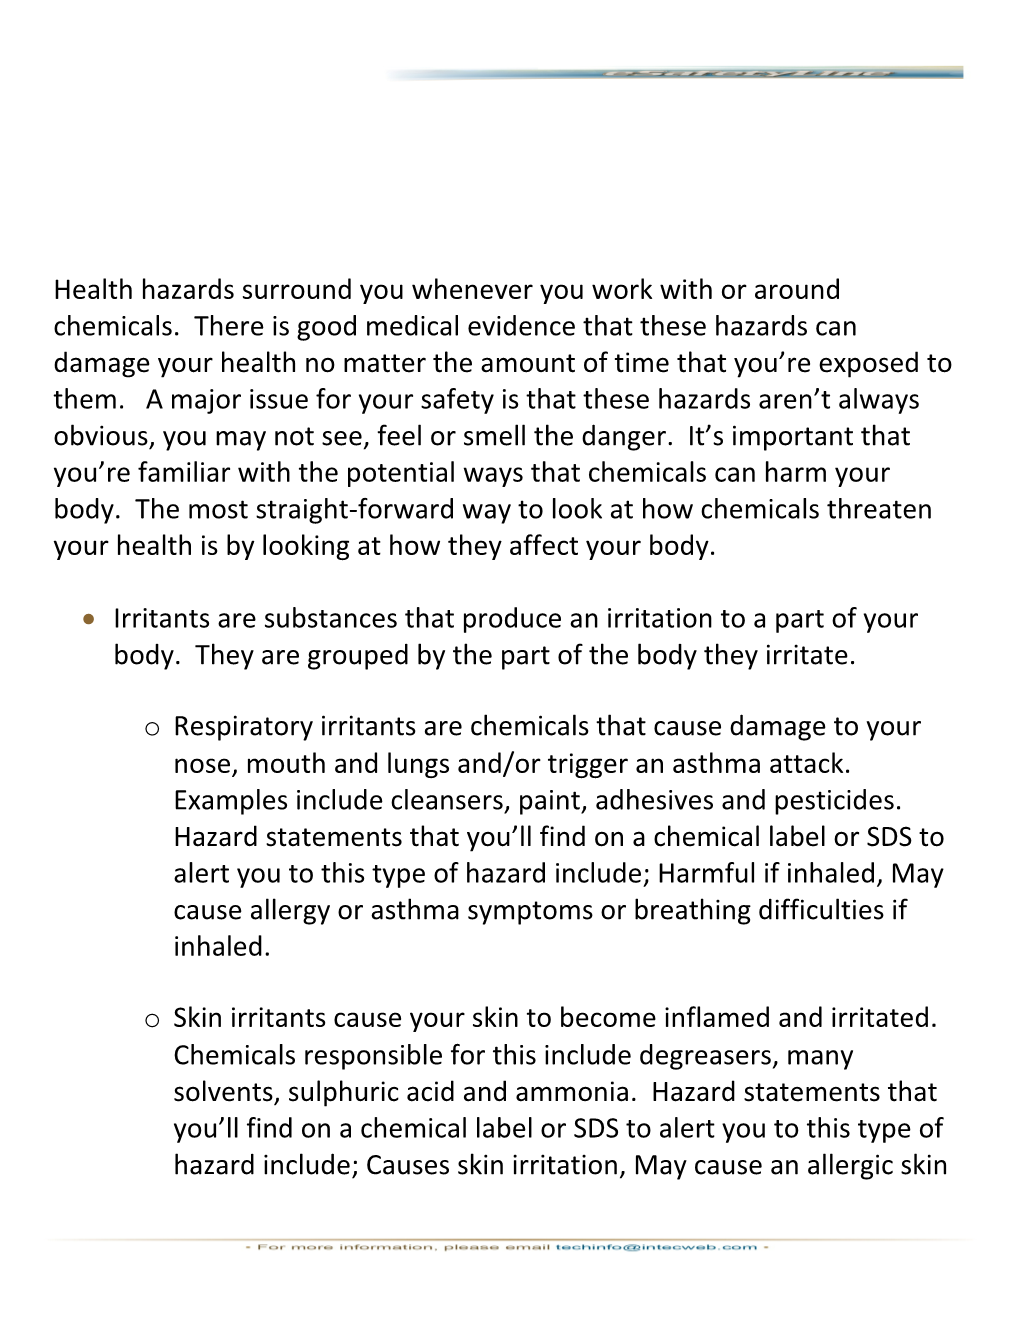 Health Hazards Surround You Whenever You Work with Or Around Chemicals. There Is Good Medical